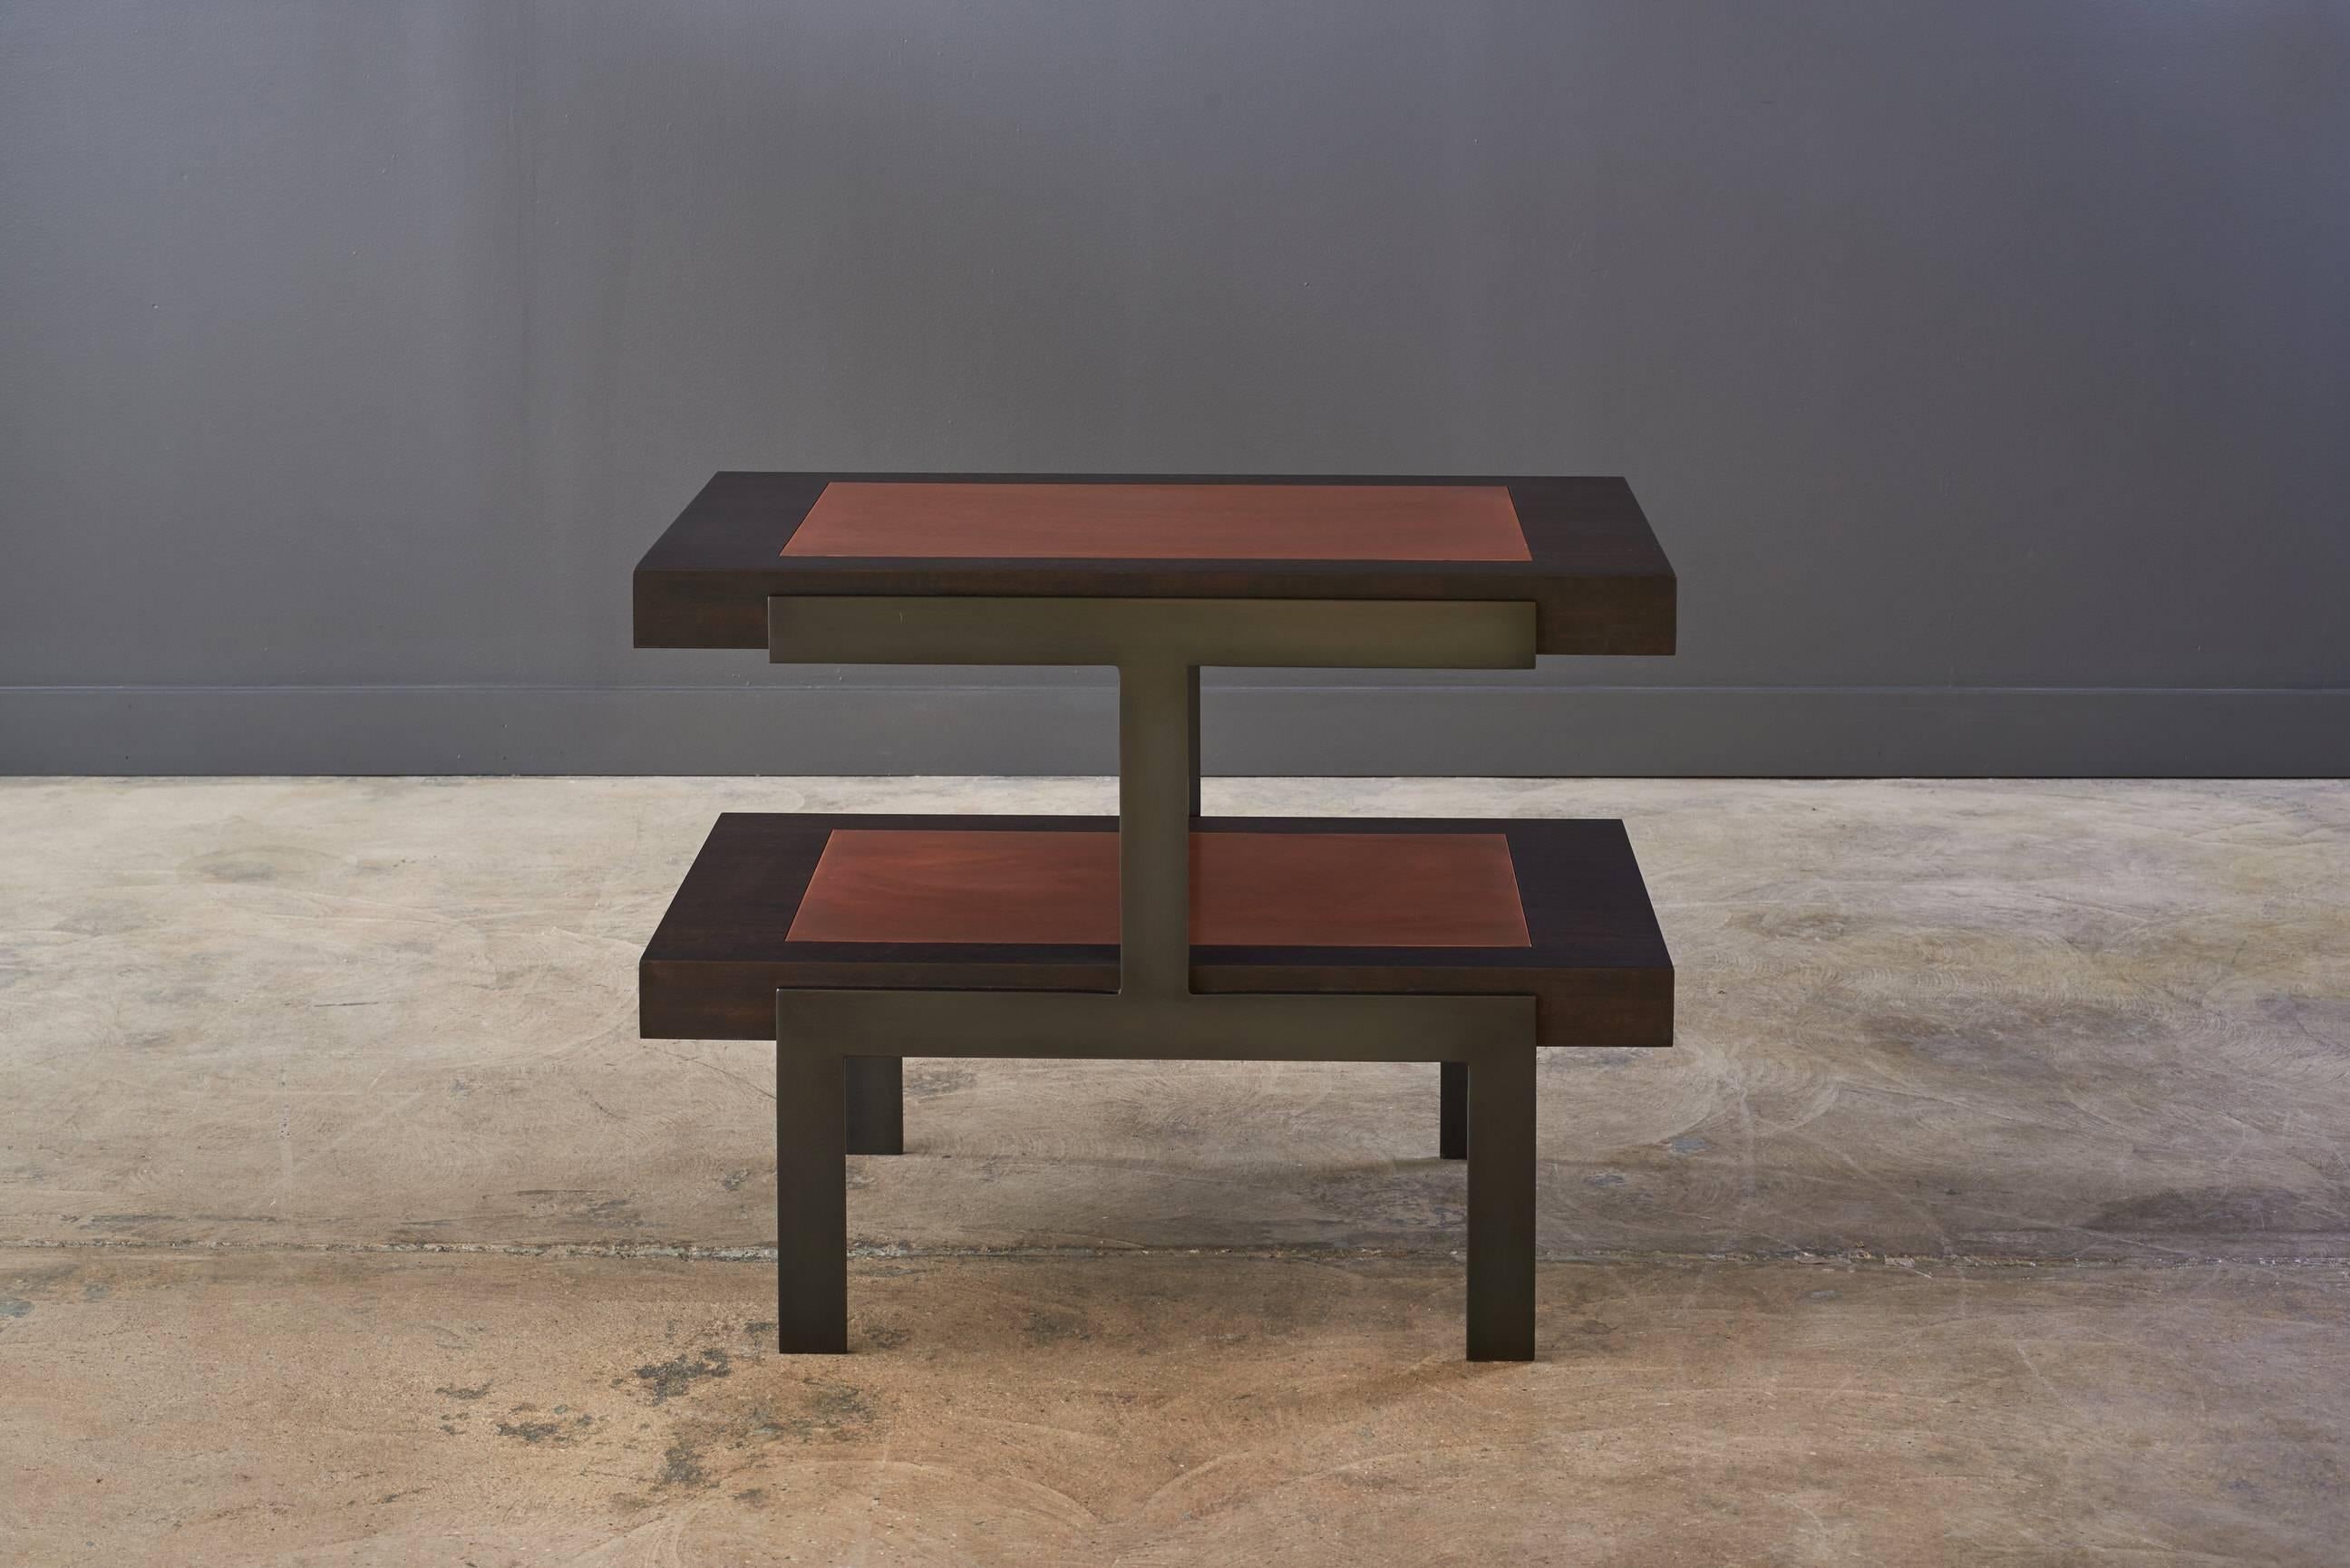 Shown in Burnt Elm, Copper nsets, Black Oxide.
Measure: 30in x 18in x 23in H.

Each Desiron piece is handcrafted in the U.S.A., fully customizable and available in a variety of finishes.